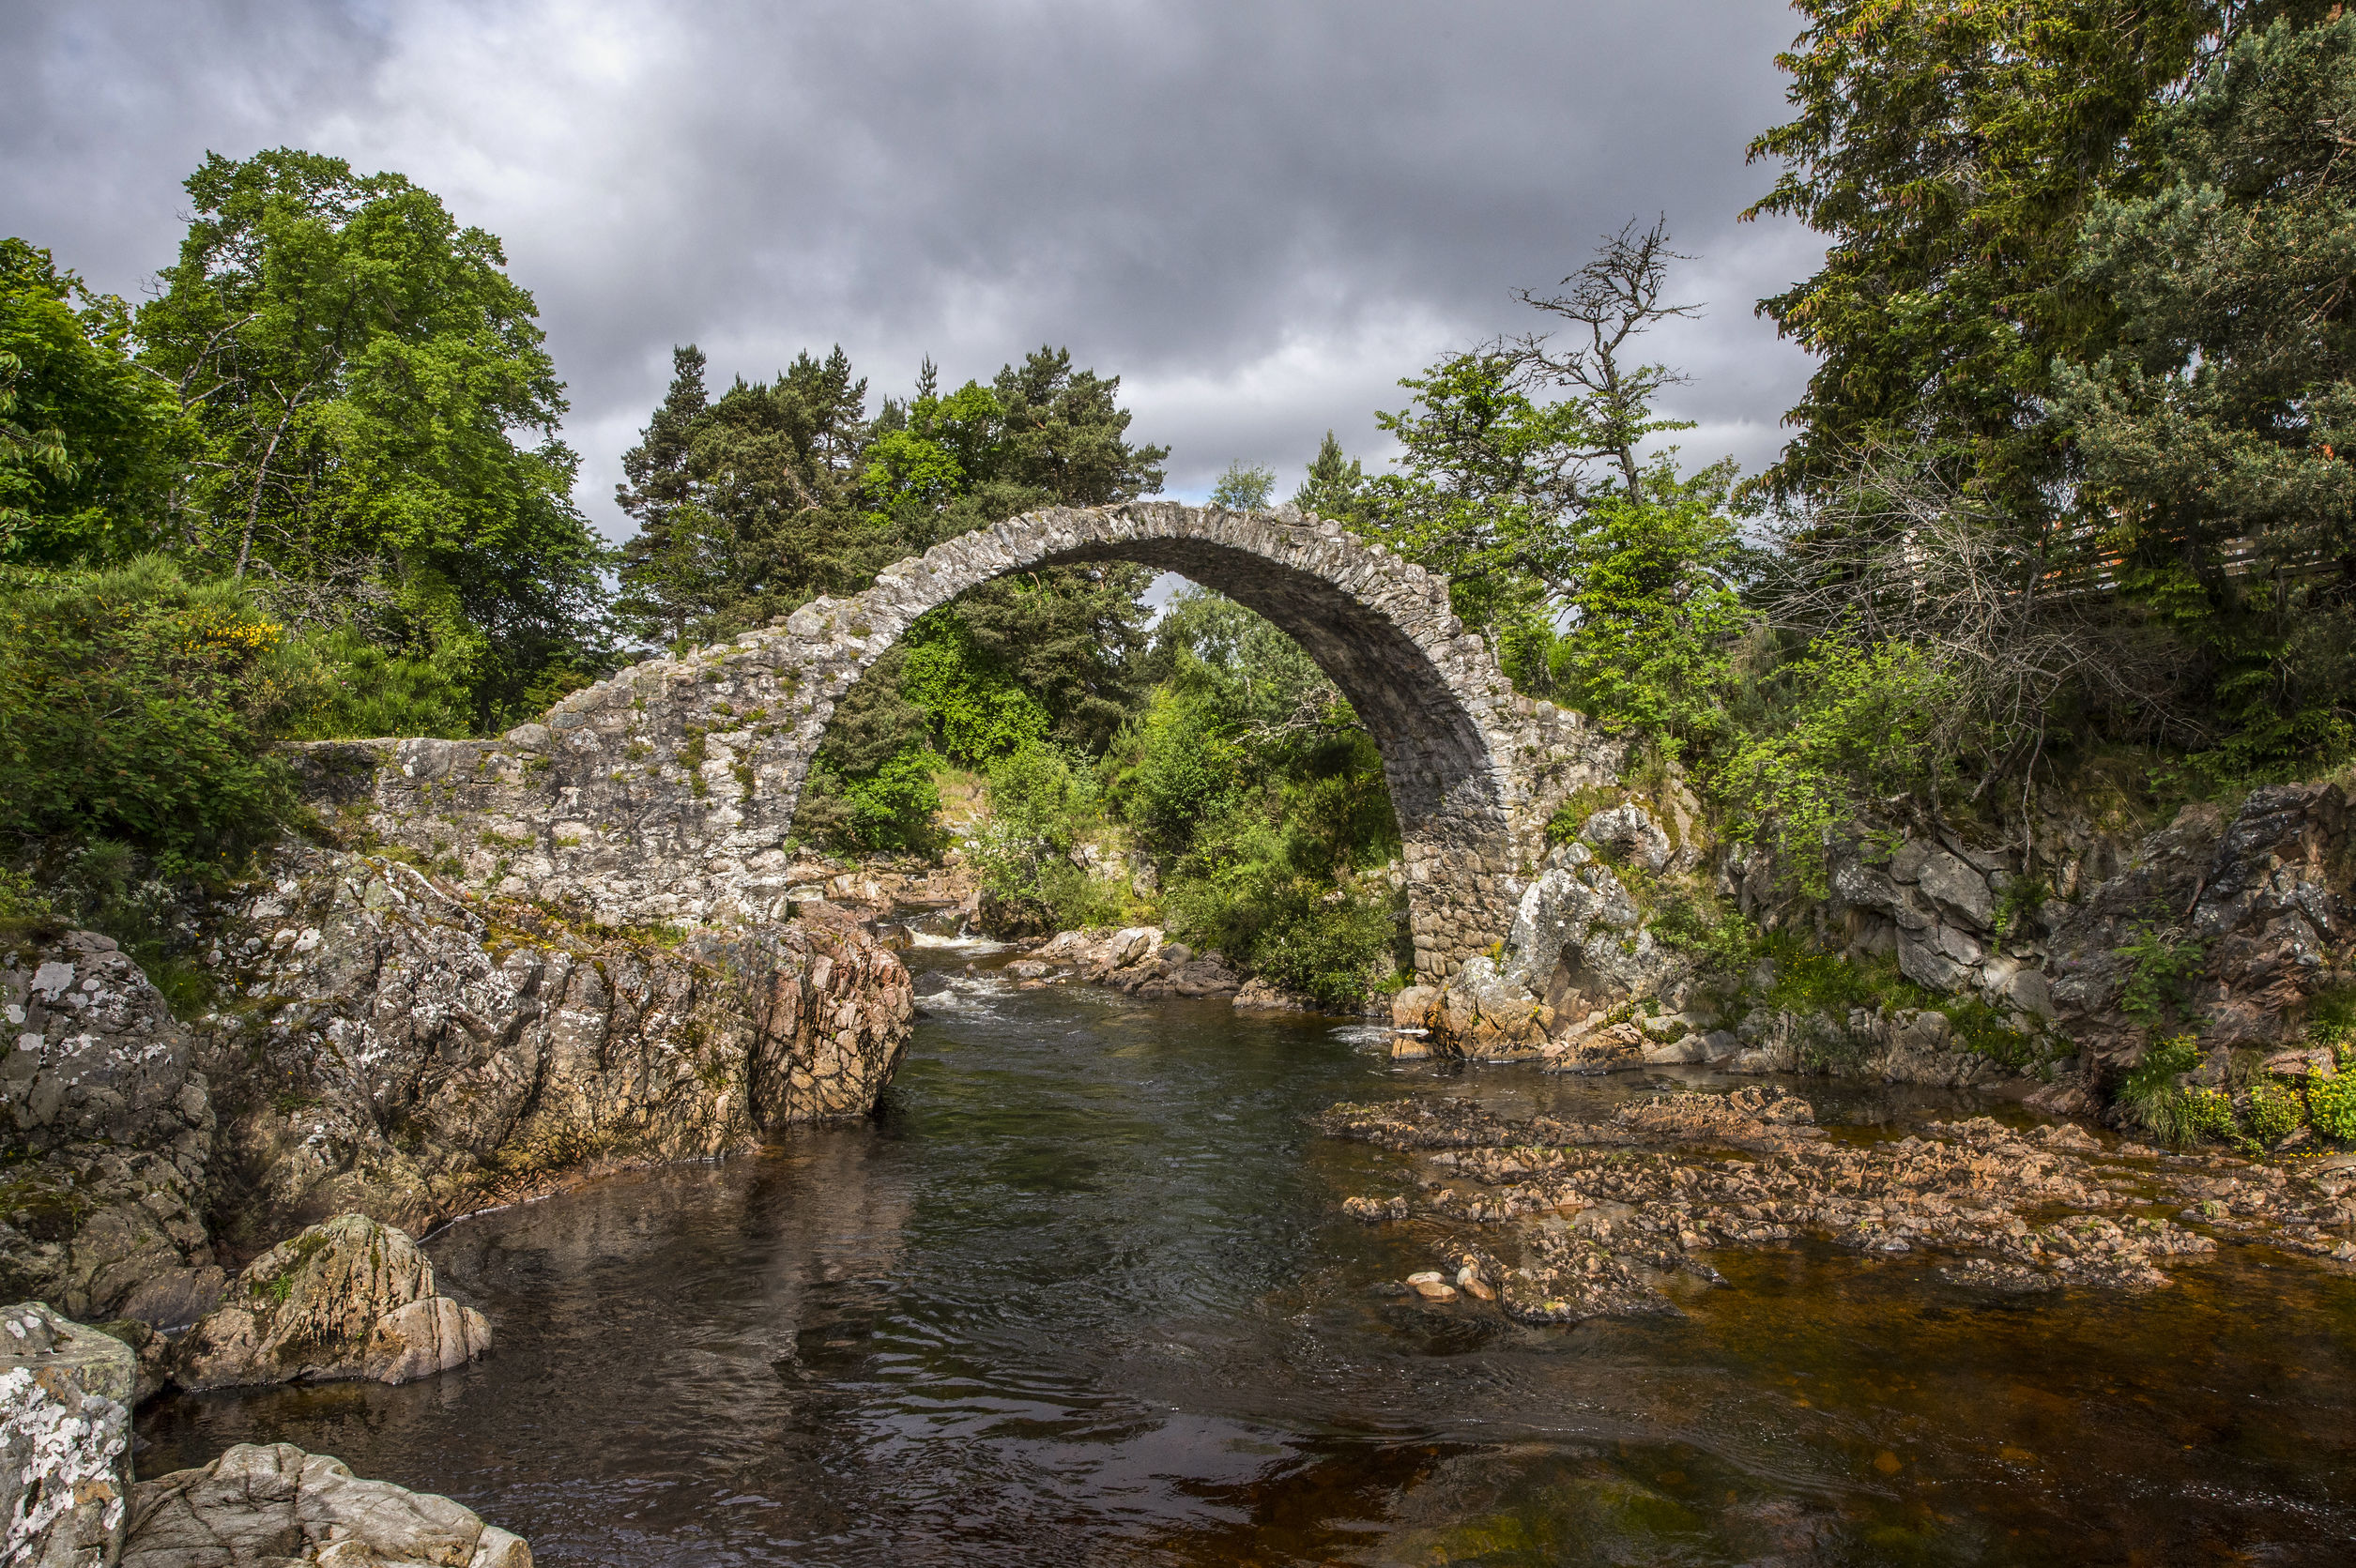 a view of the old packhorse bridge at carrbridge in the scottish highlands